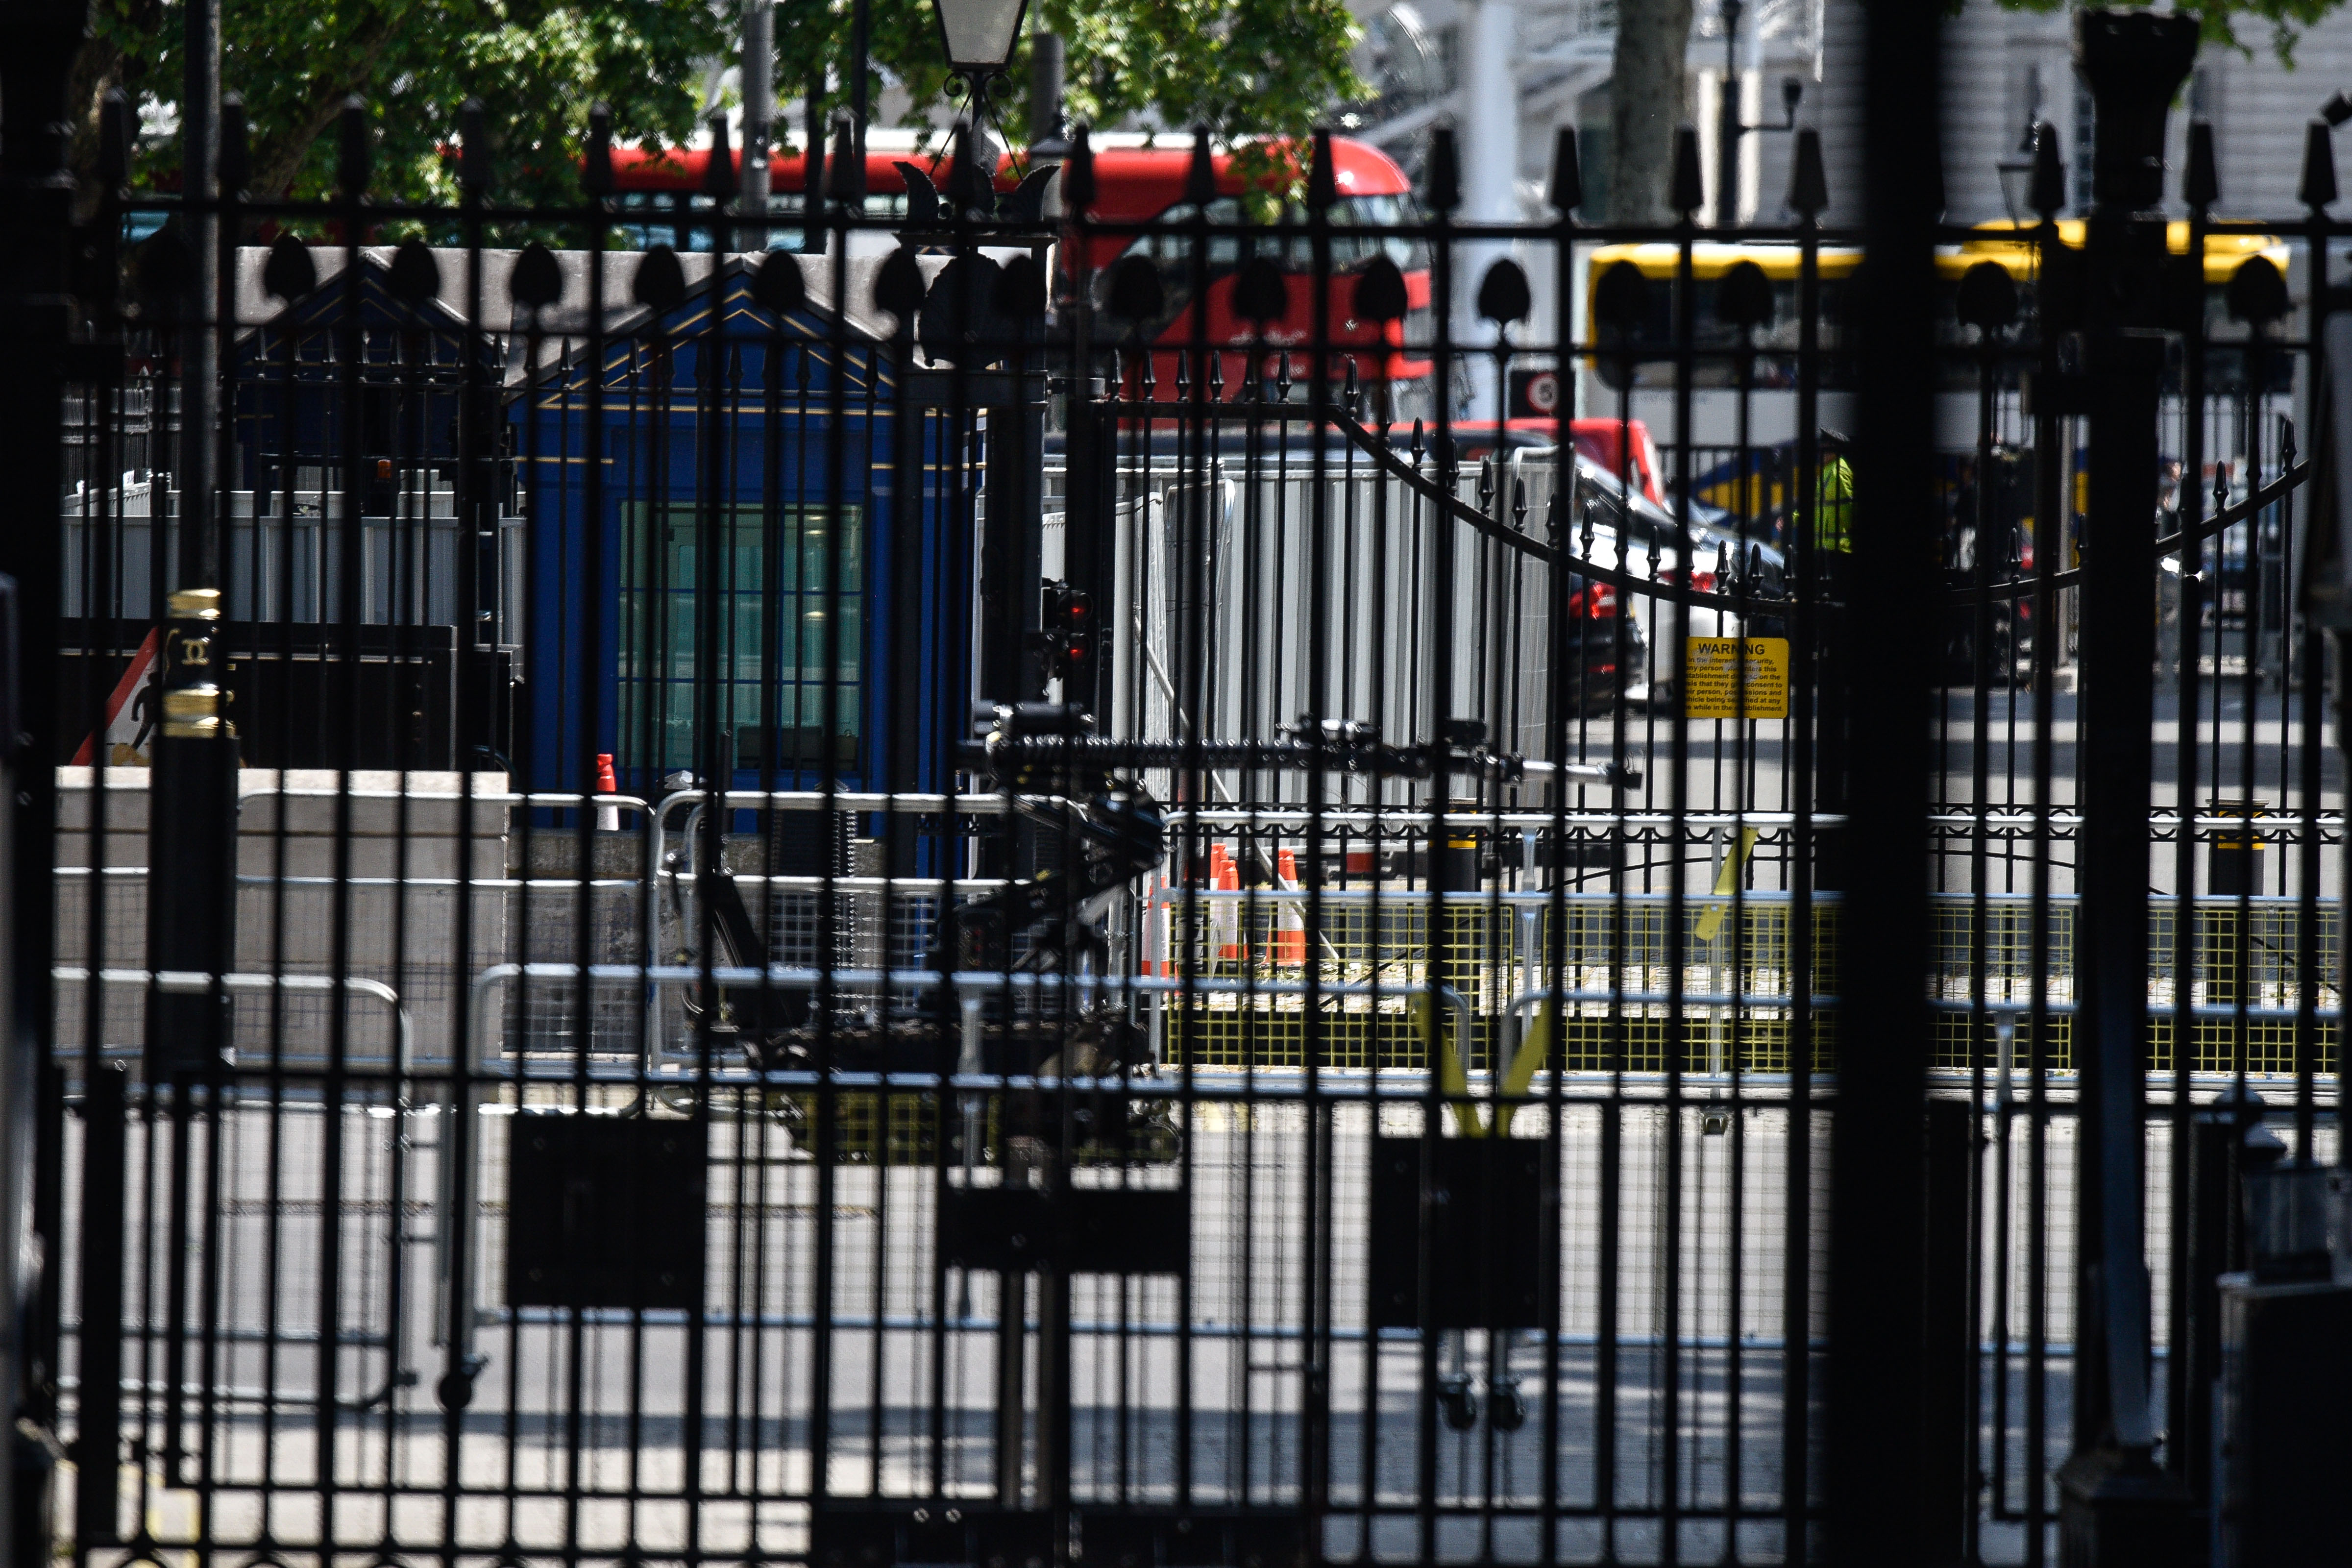 A bomb disposal robot drives past the gates to Downing Street on May 23, 2019 in London, England. Whitehall in Westminster was closed while police assessed a suspicious item.